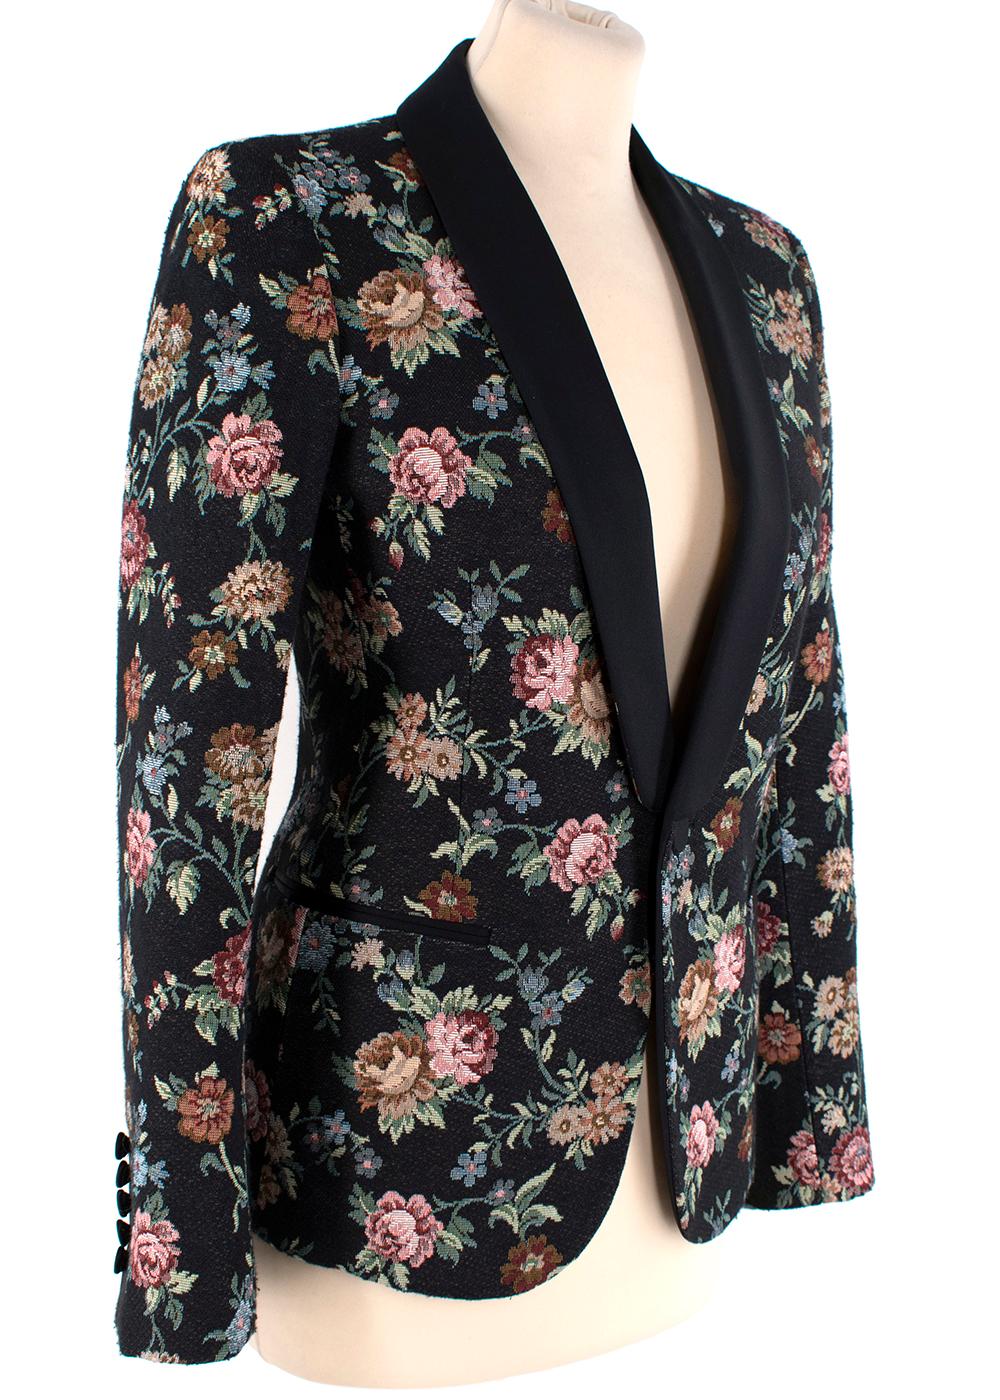 Saint Laurent Single Breasted Black Floral Embroidered Blazer

- One button closure at the front
- Fully silk lined 
- Black single lapel
- No vent
- Two side pockets a the front
- Two internal pockets
- Floral-tapestry

Materials:
50% Polyester
38%